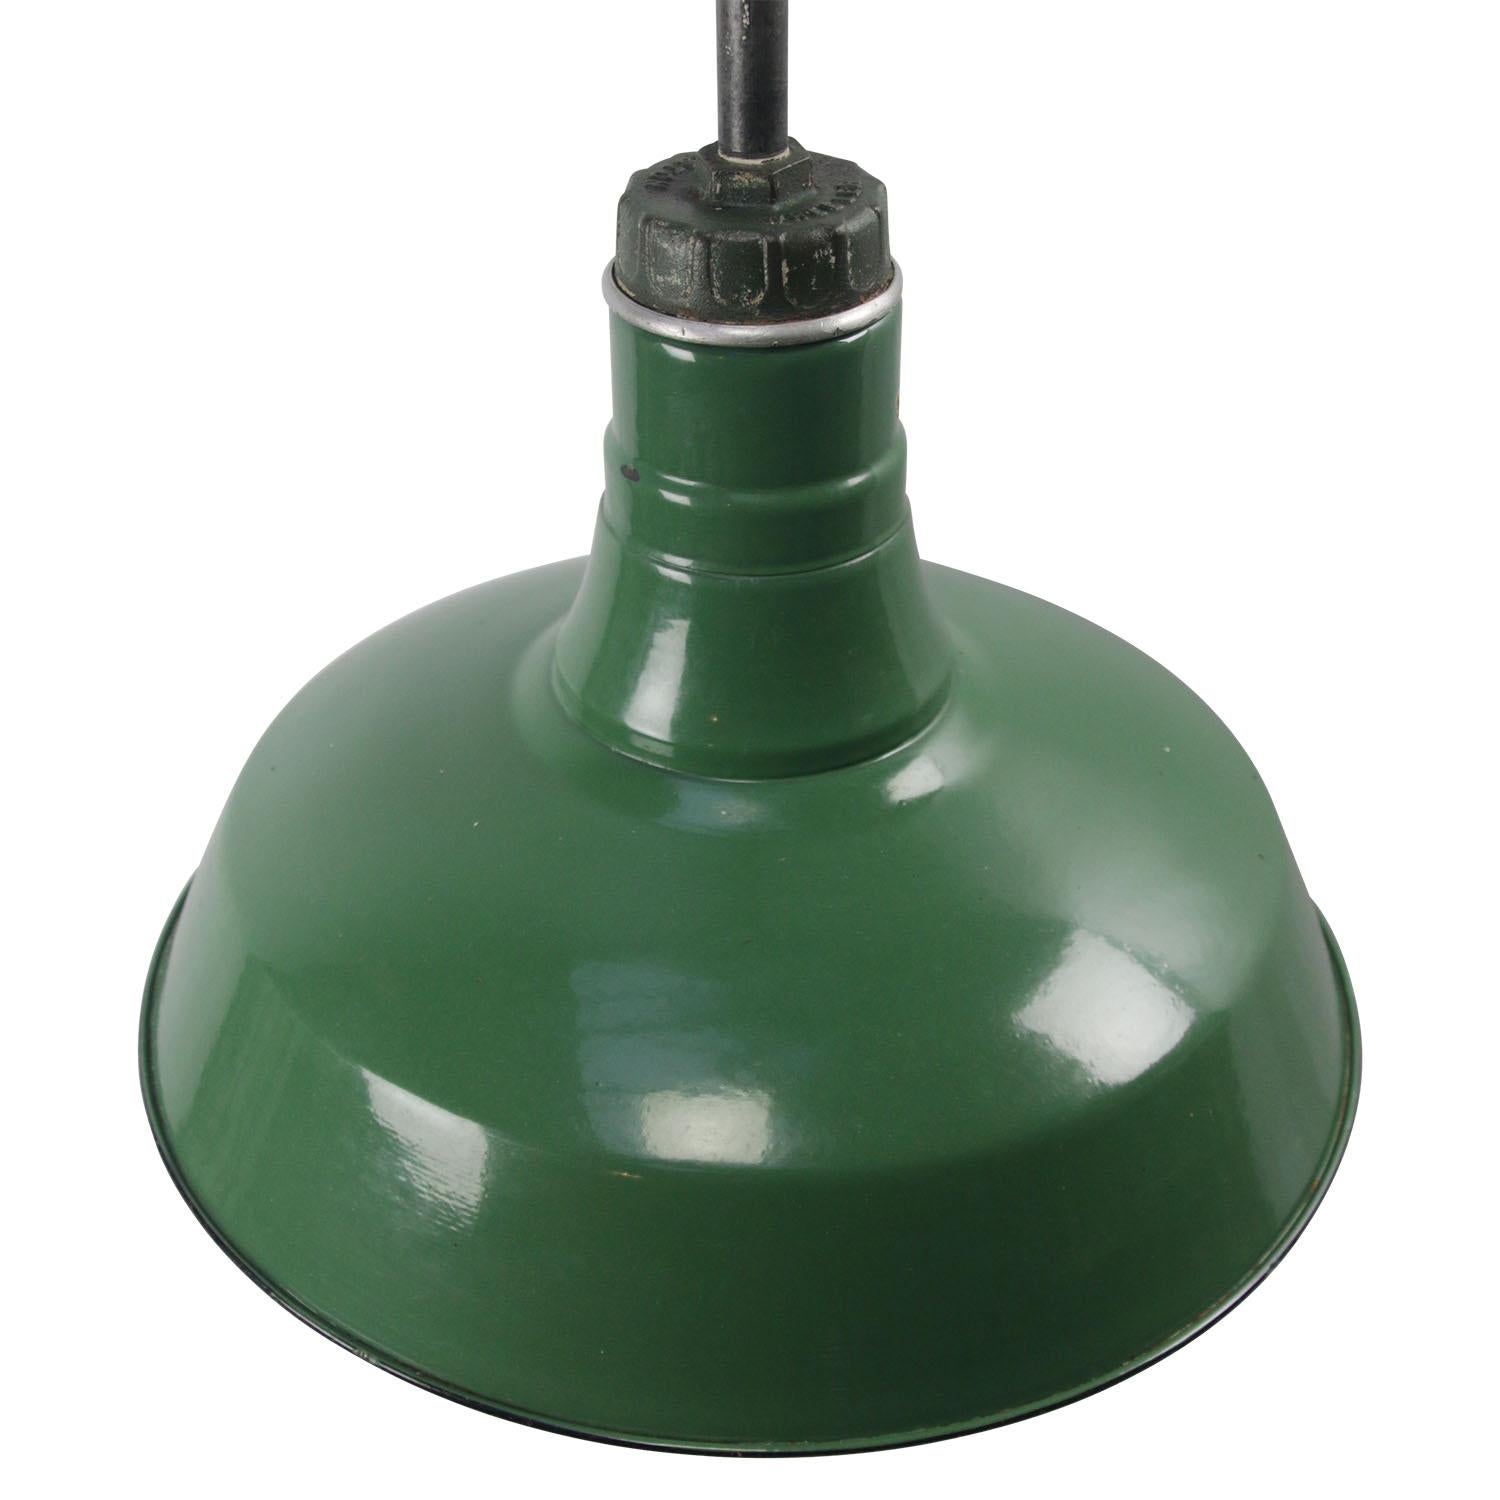 American industrial factory pendant light by Wheeler, Boston, USA.
Green enamel white interior.
Green Metal top with cast ion clamp

Weight 3.20 kg / 7.1 lb

Priced per individual item. All lamps have been made suitable by international